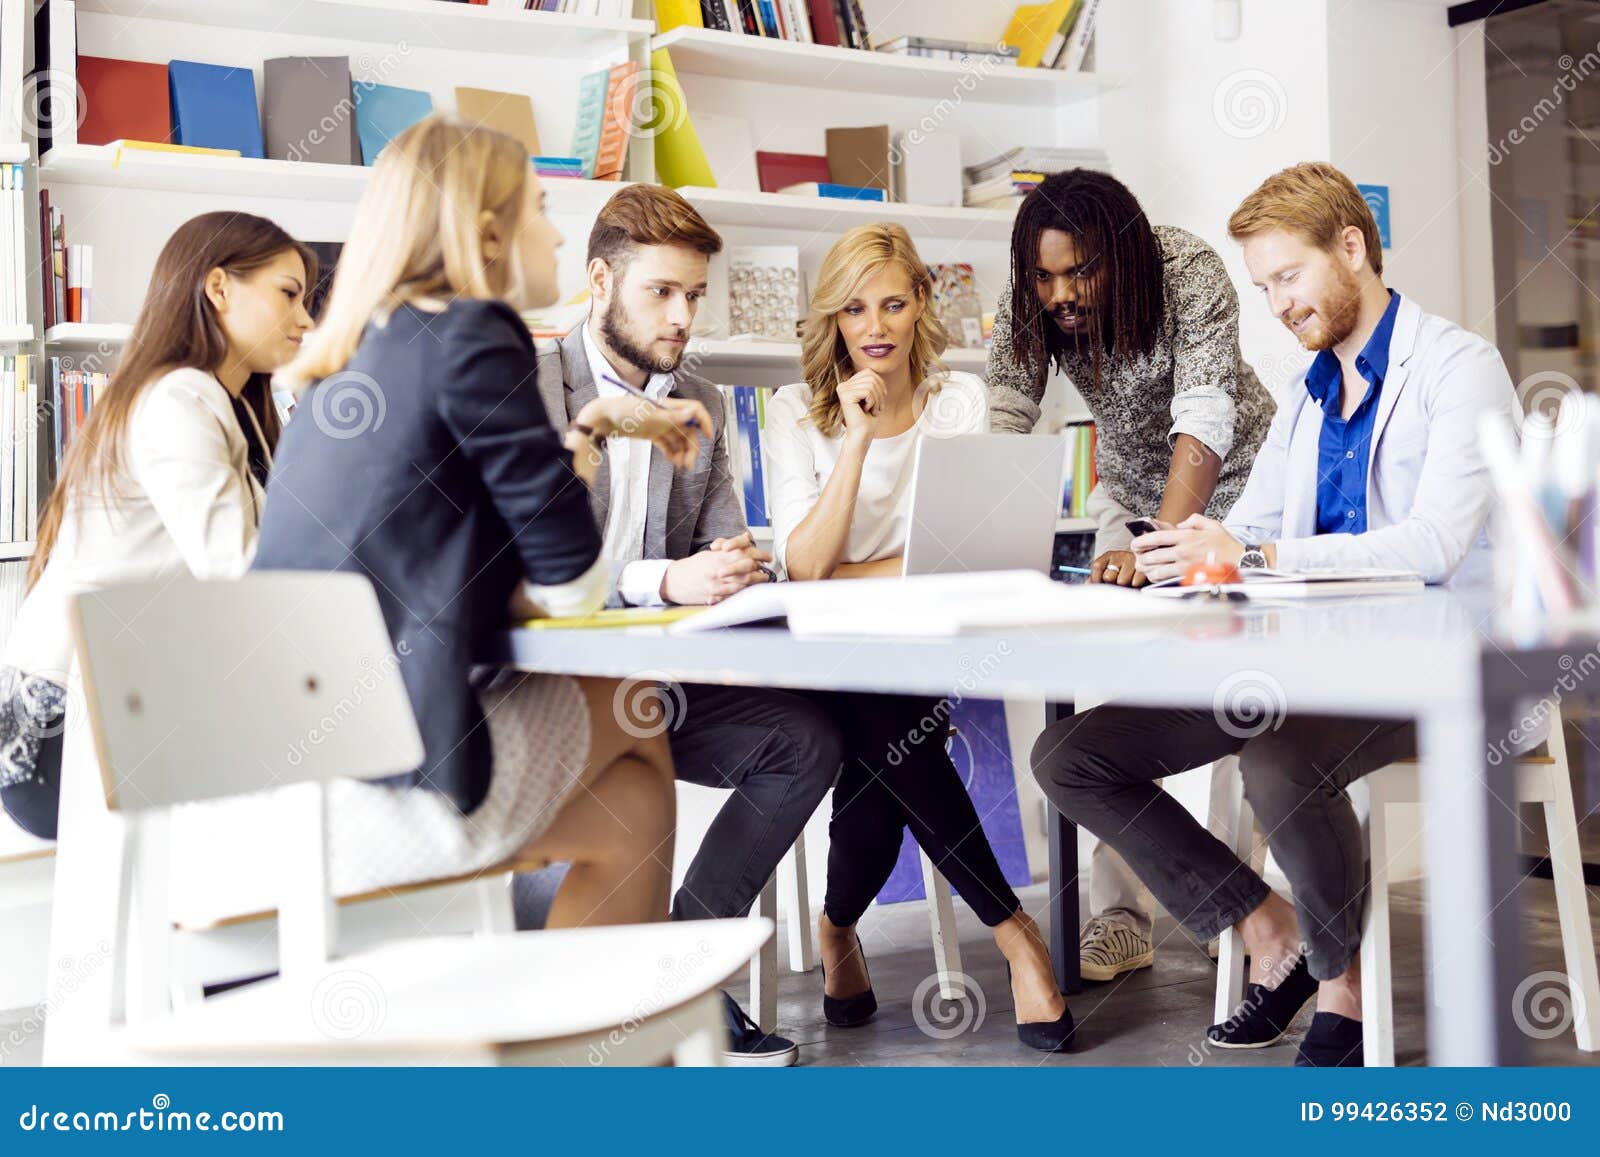 Colleagues Brainstorming in Office Stock Photo - Image of desk, office:  99426352